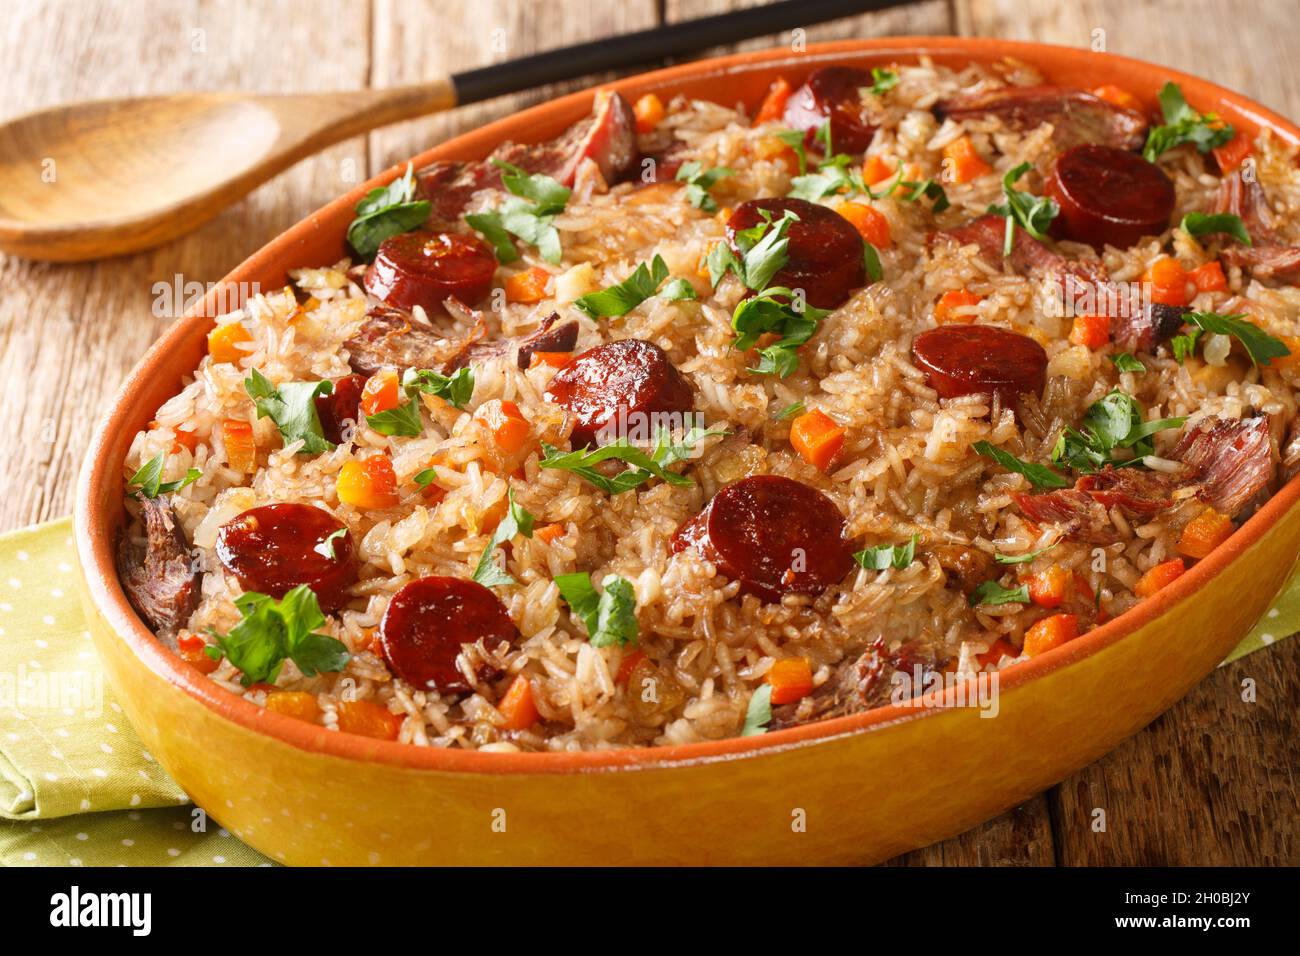 Portuguese duck rice arroz de pato cooked with red wine, onion, carrot and chorizo close up in the baking dish on the wooden table. Horizontal Stock Photo